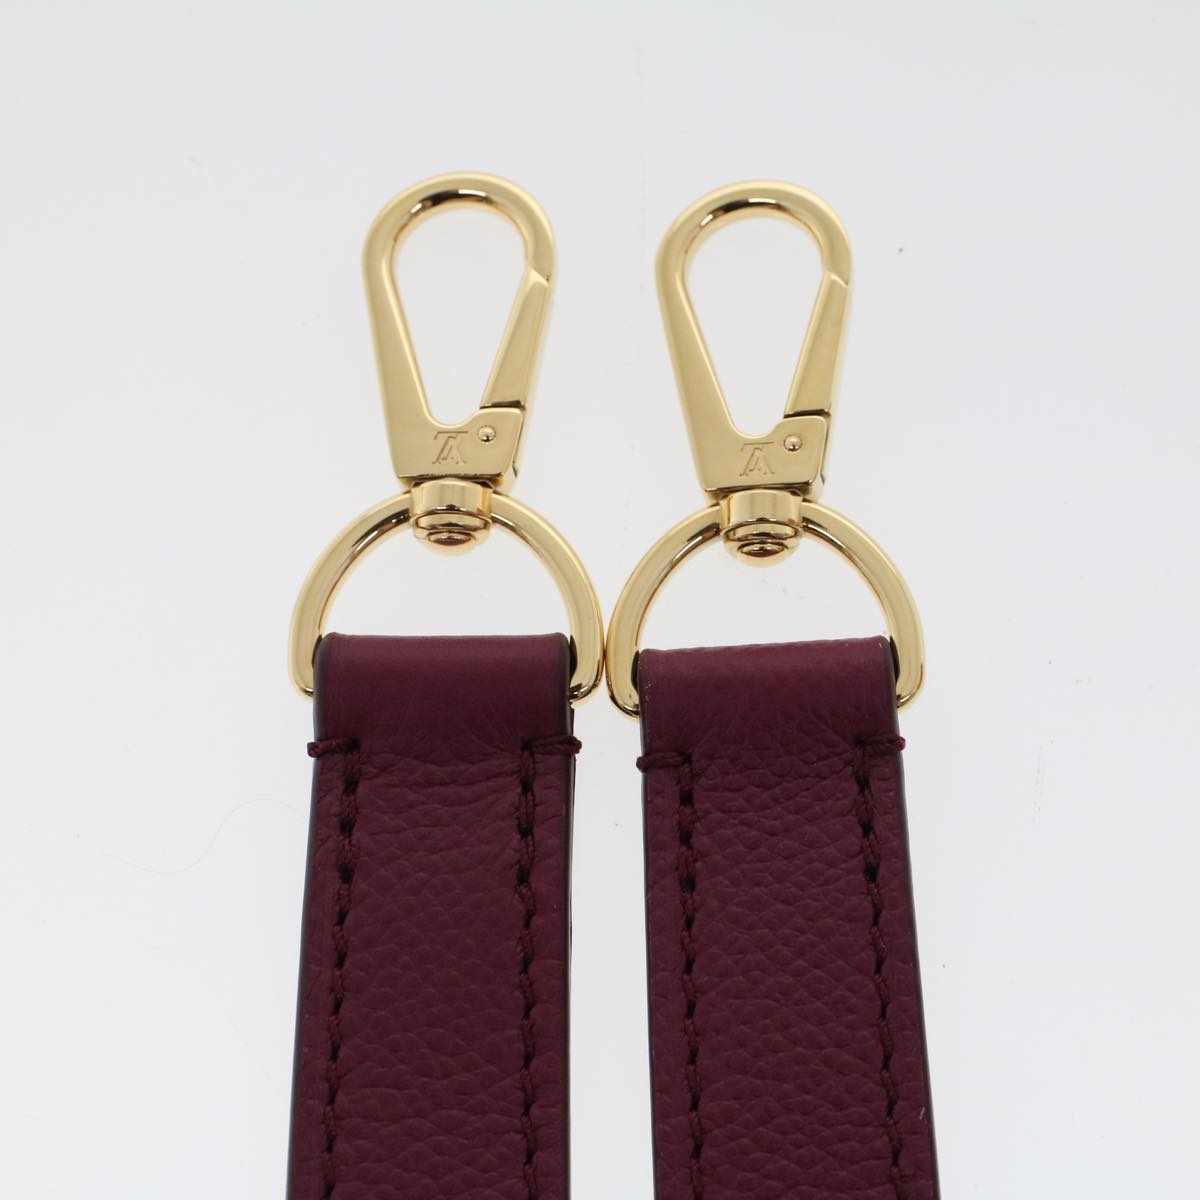 LOUIS VUITTON Shoulder Strap Leather 34.3"" Wine Red LV Auth 42975